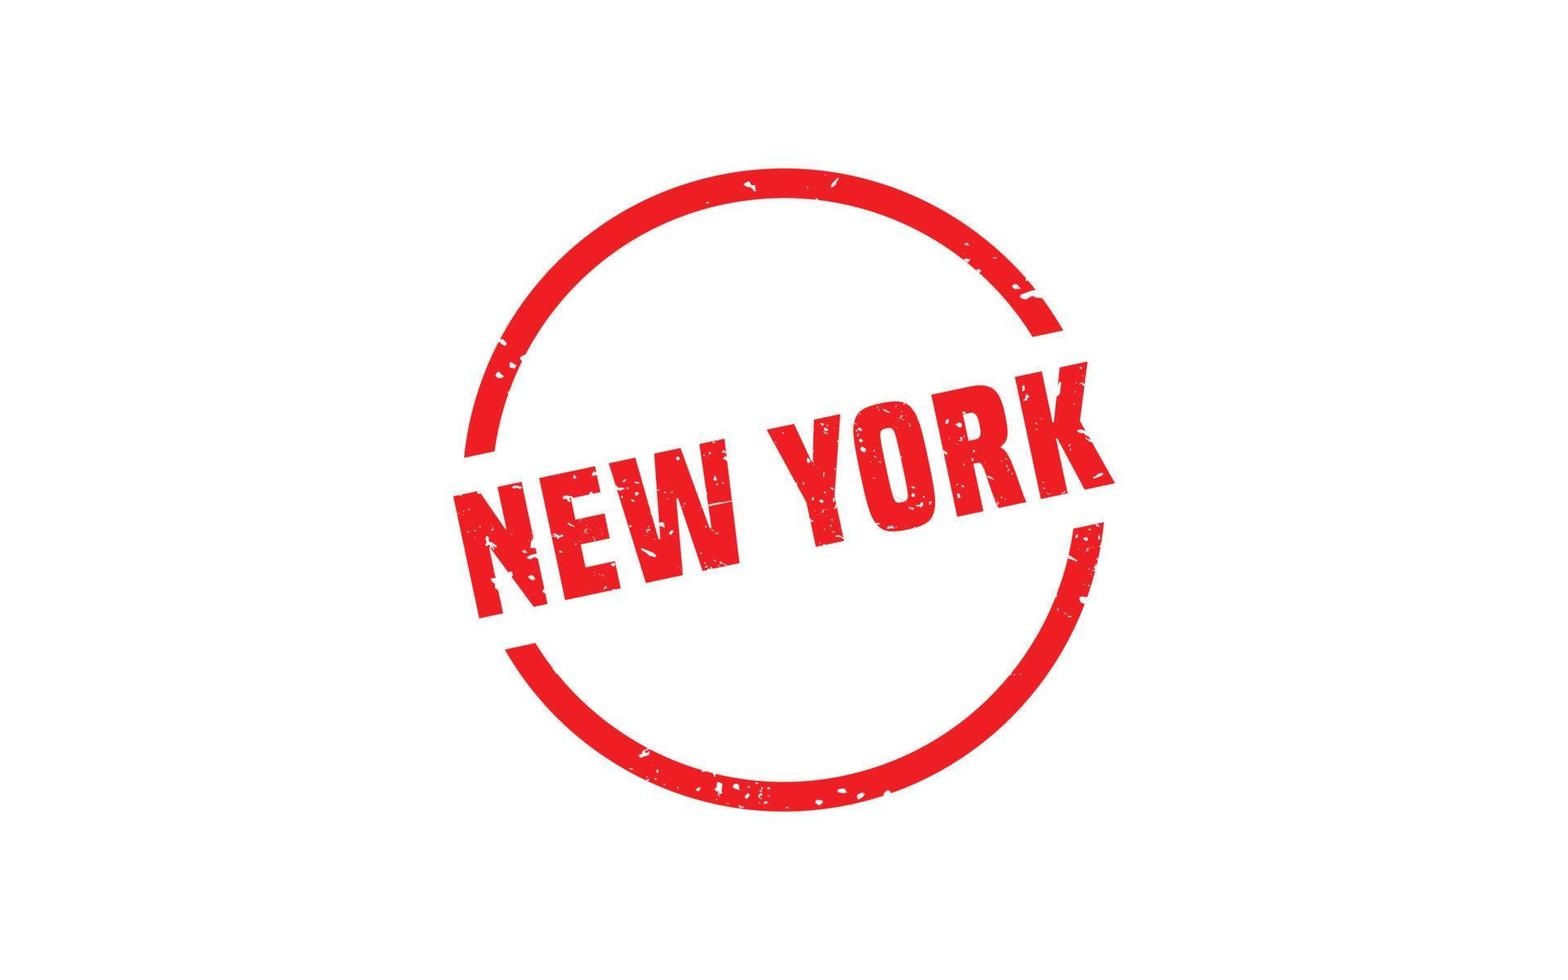 NEW YORK rubber stamp texture with grunge style on white background vector